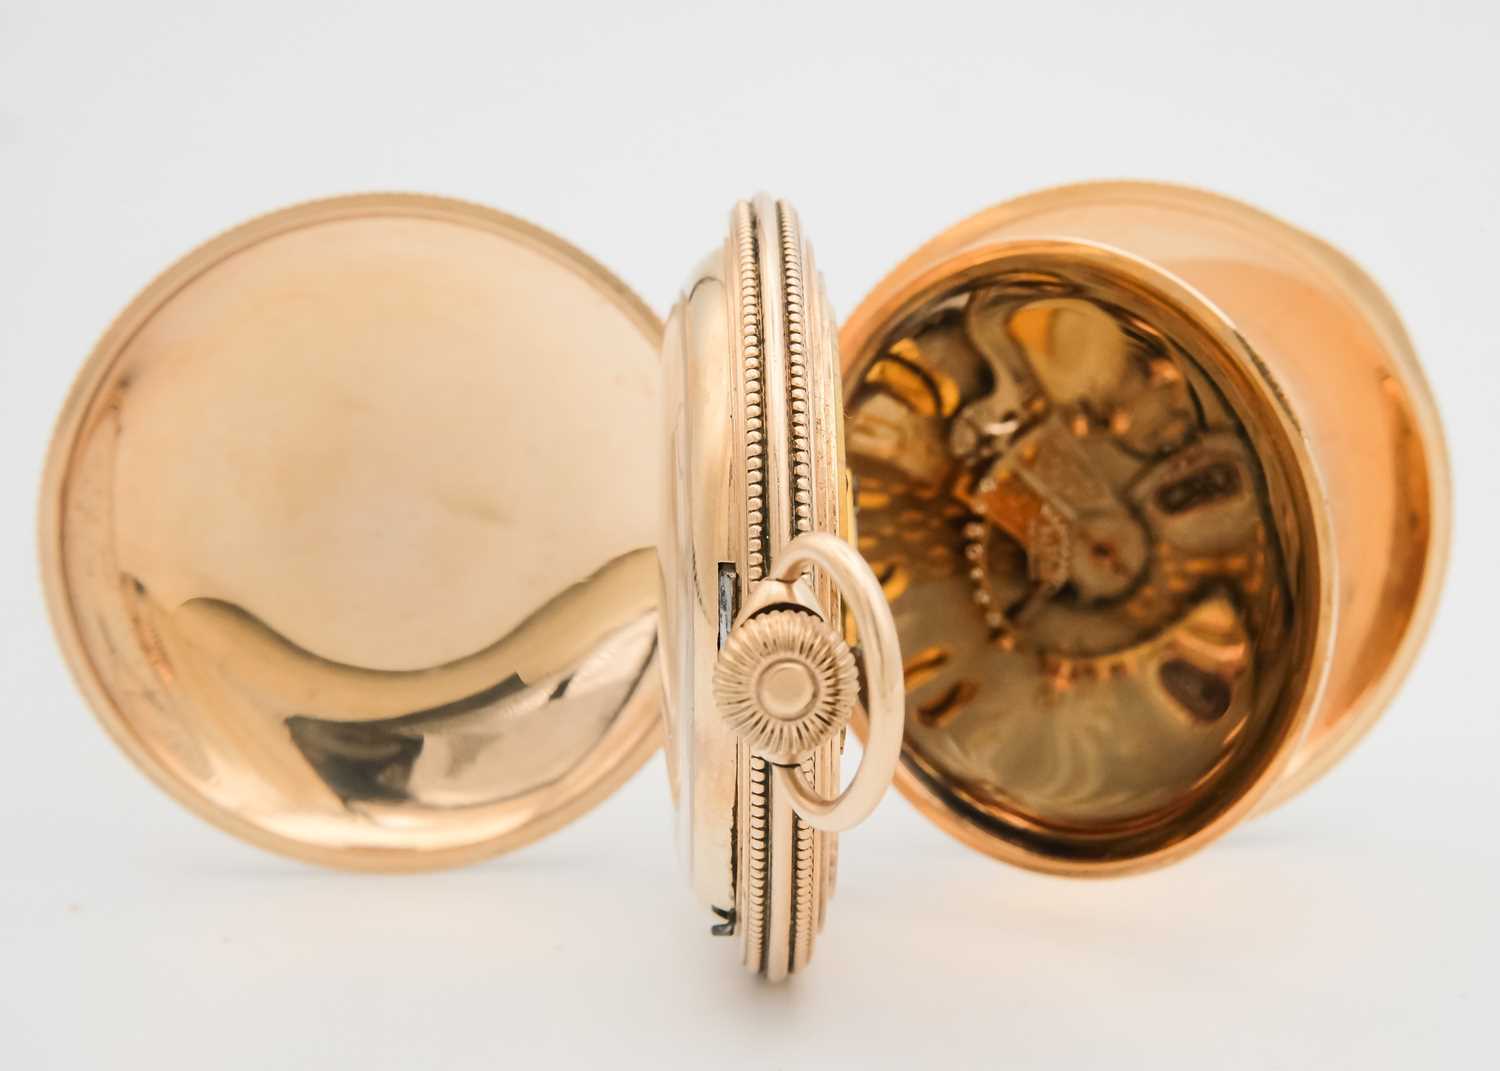 HAMPDEN WATCH CO. - A large rose gold plated full hunter crown wind pocket watch. - Image 2 of 6